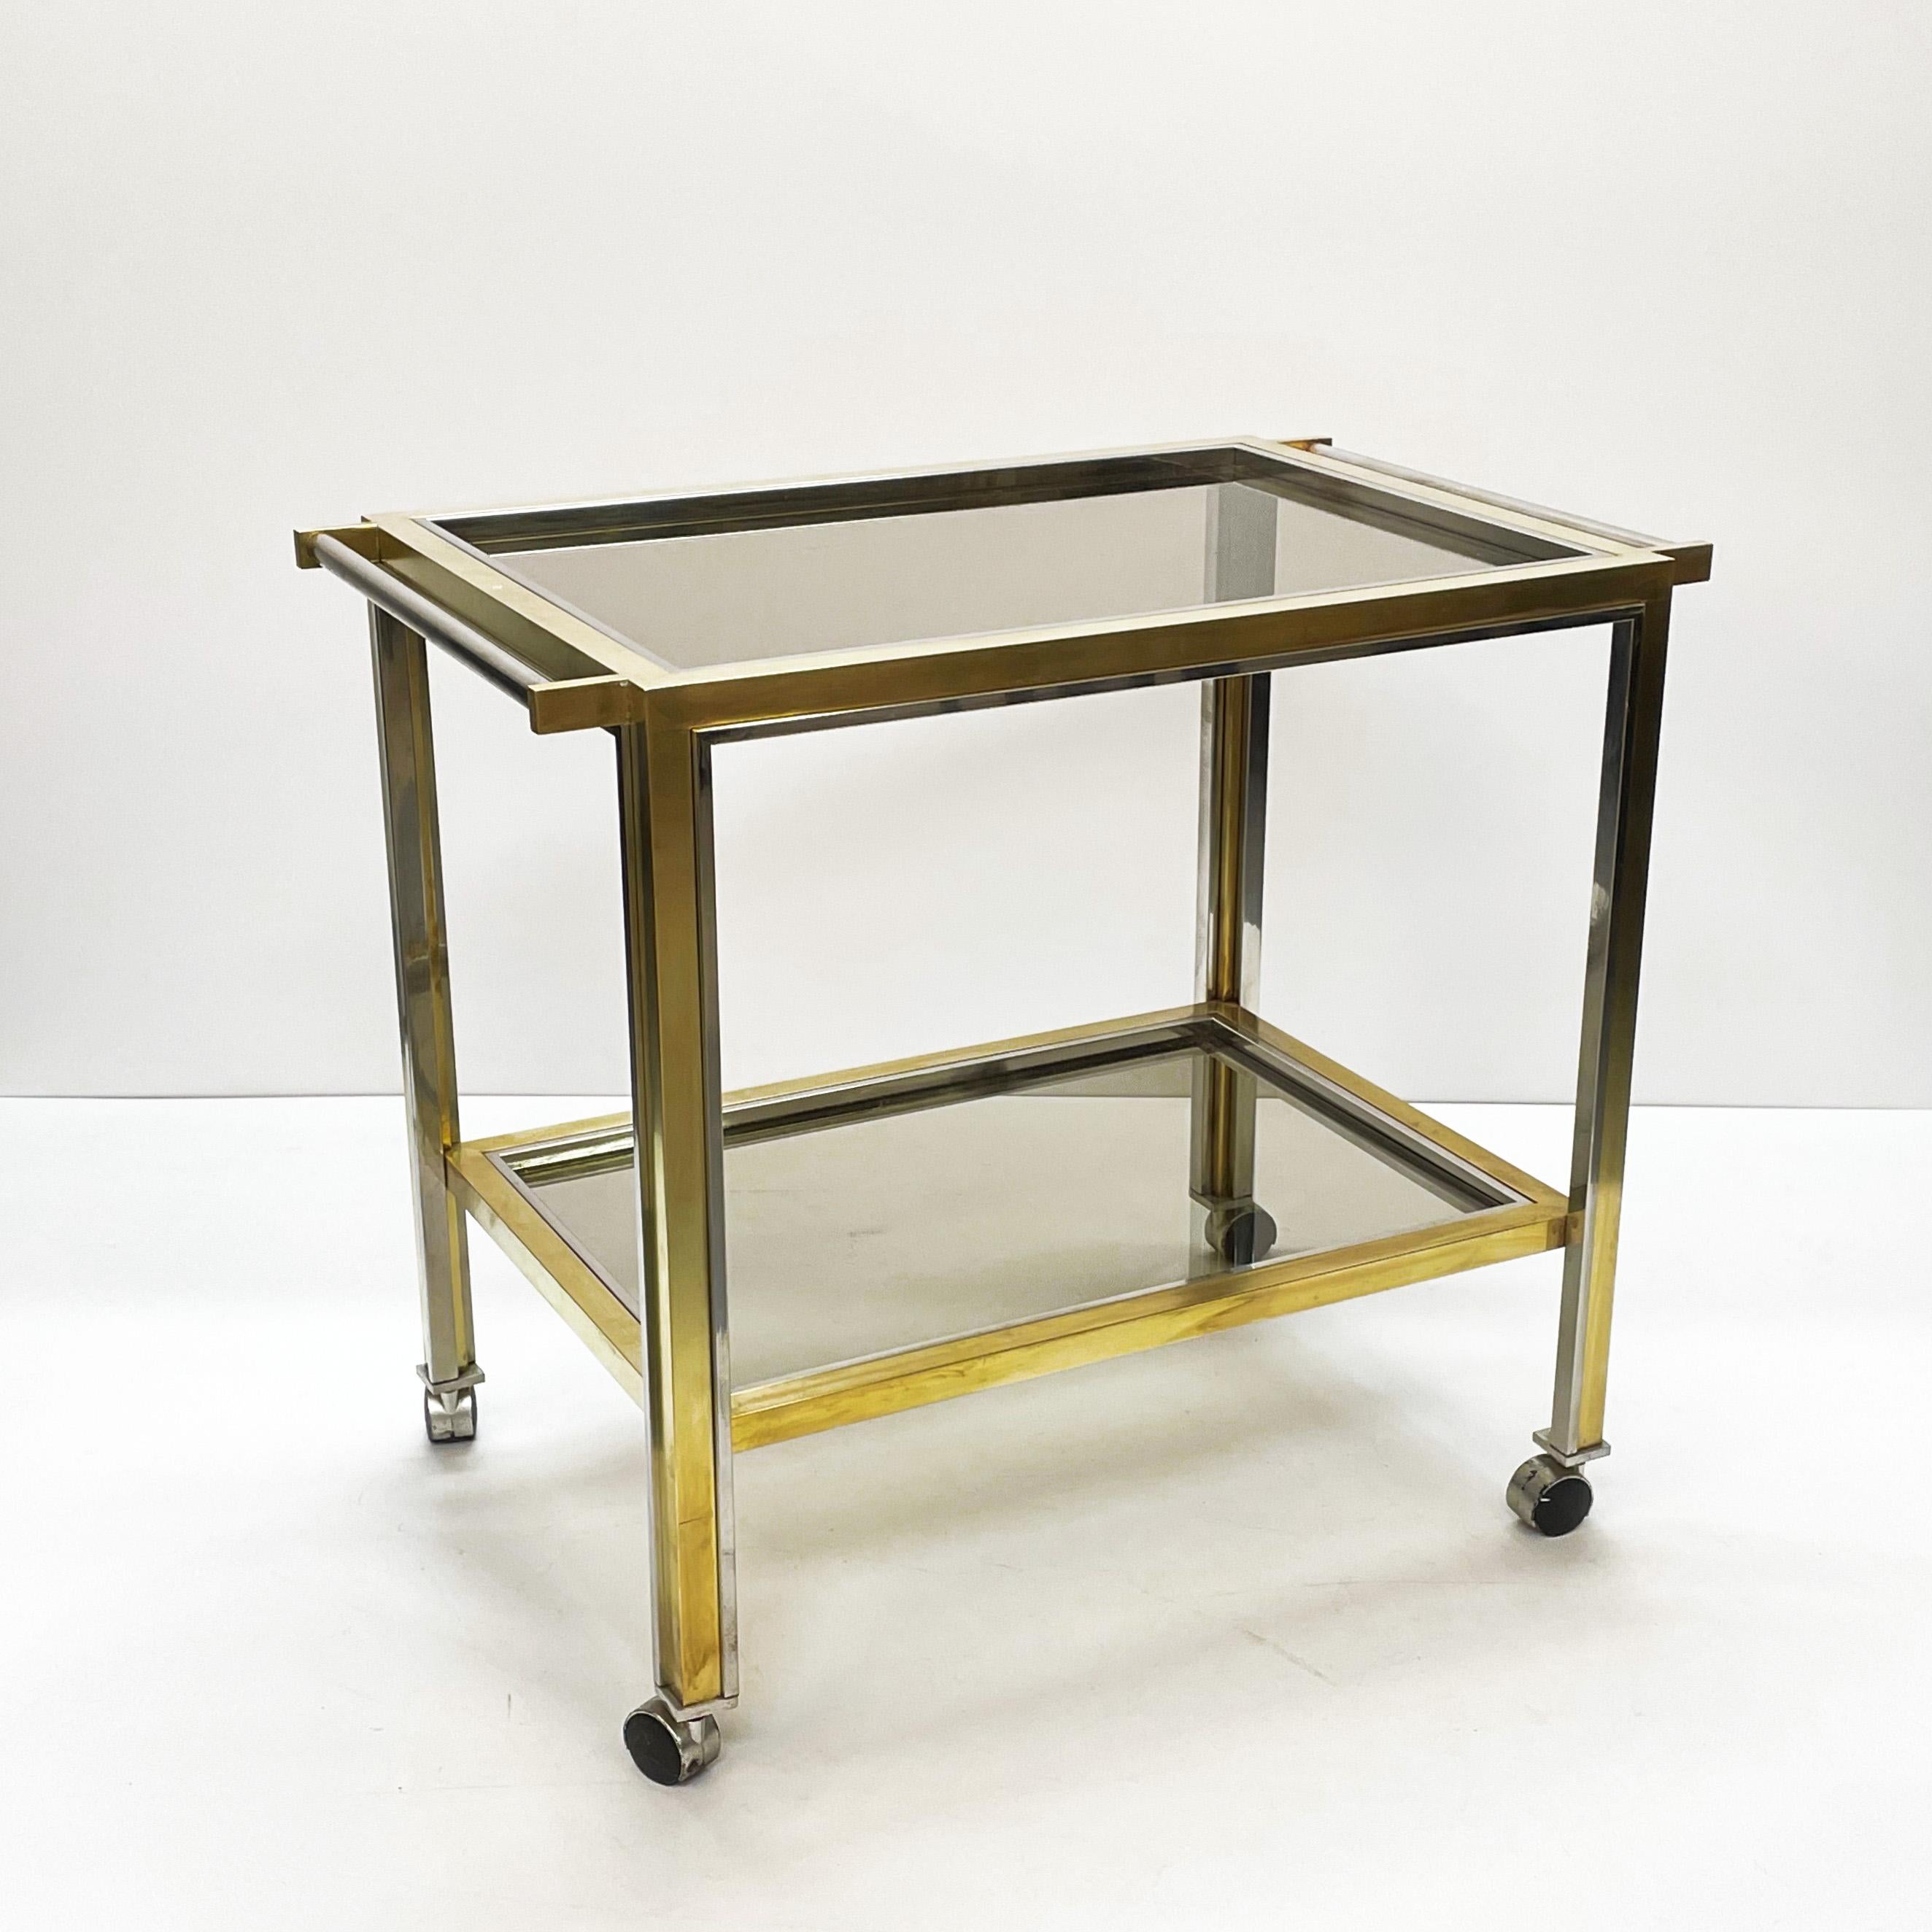 Rega Style Midcentury Brass and Chrome Italian Bar Cart with Glass Shelves 1970s For Sale 3